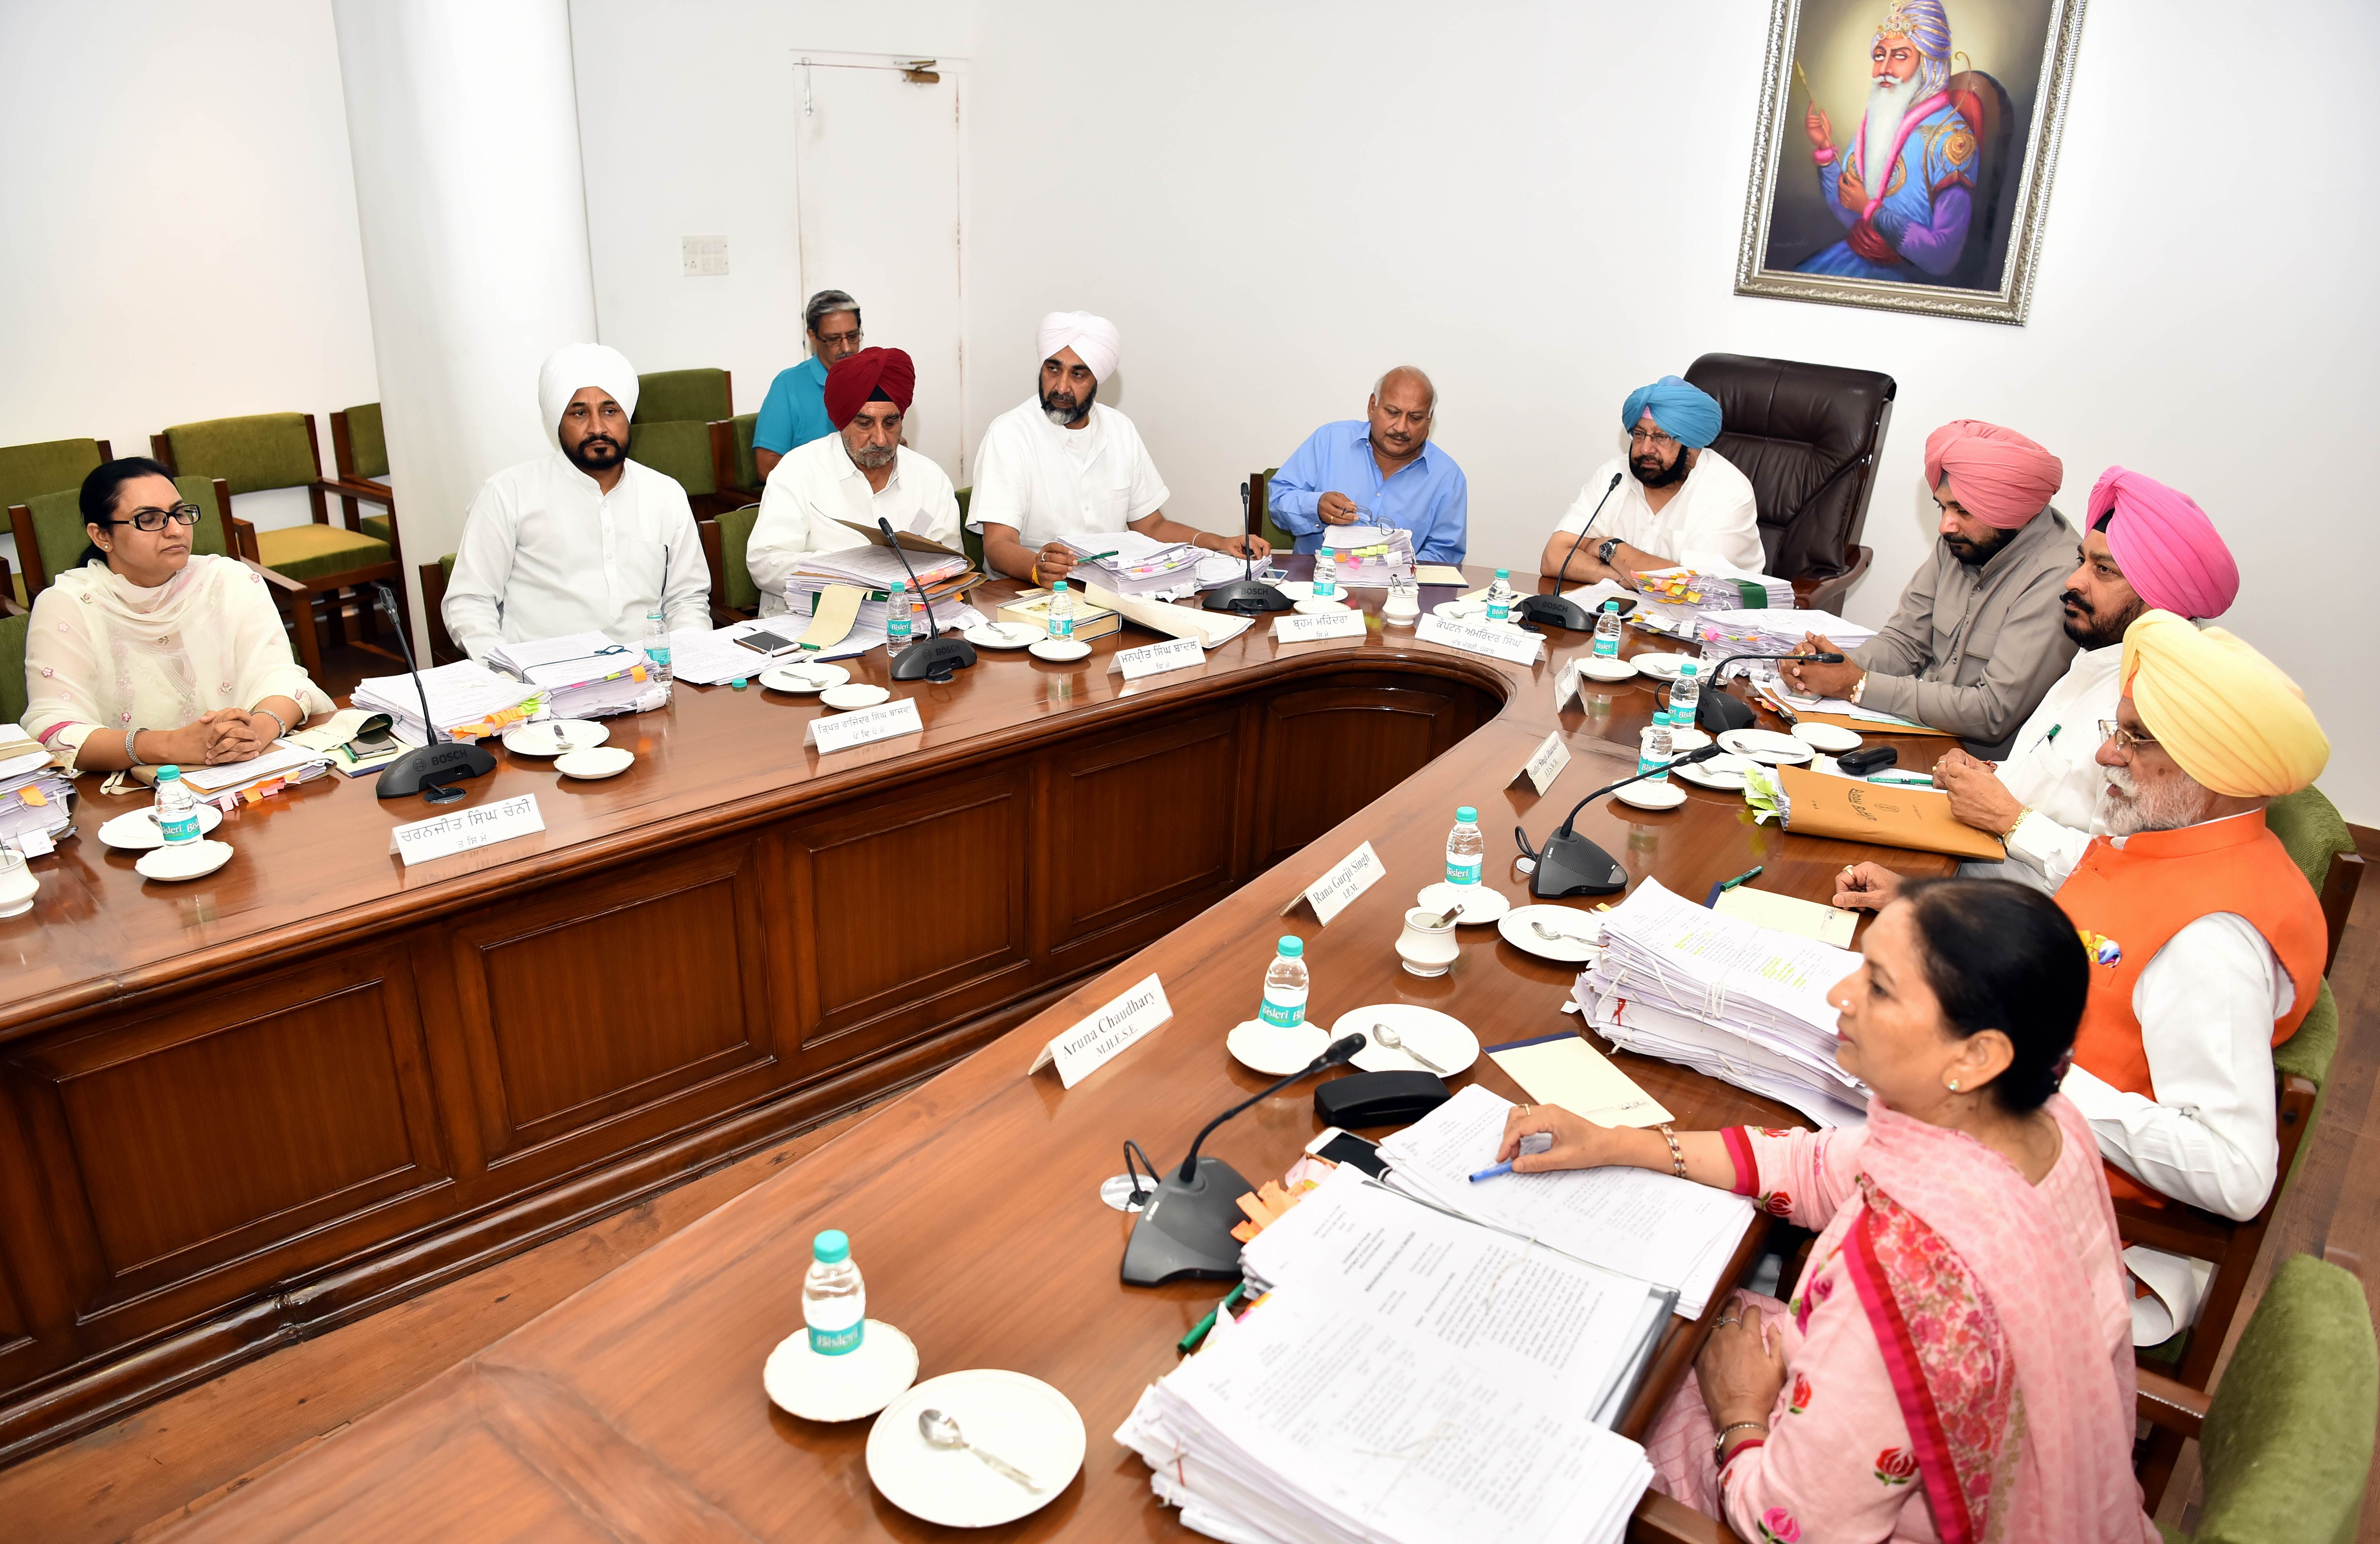 Punjab Chief Minister Captain Amarinder Singh presiding over the Cabinet meeting at CMO